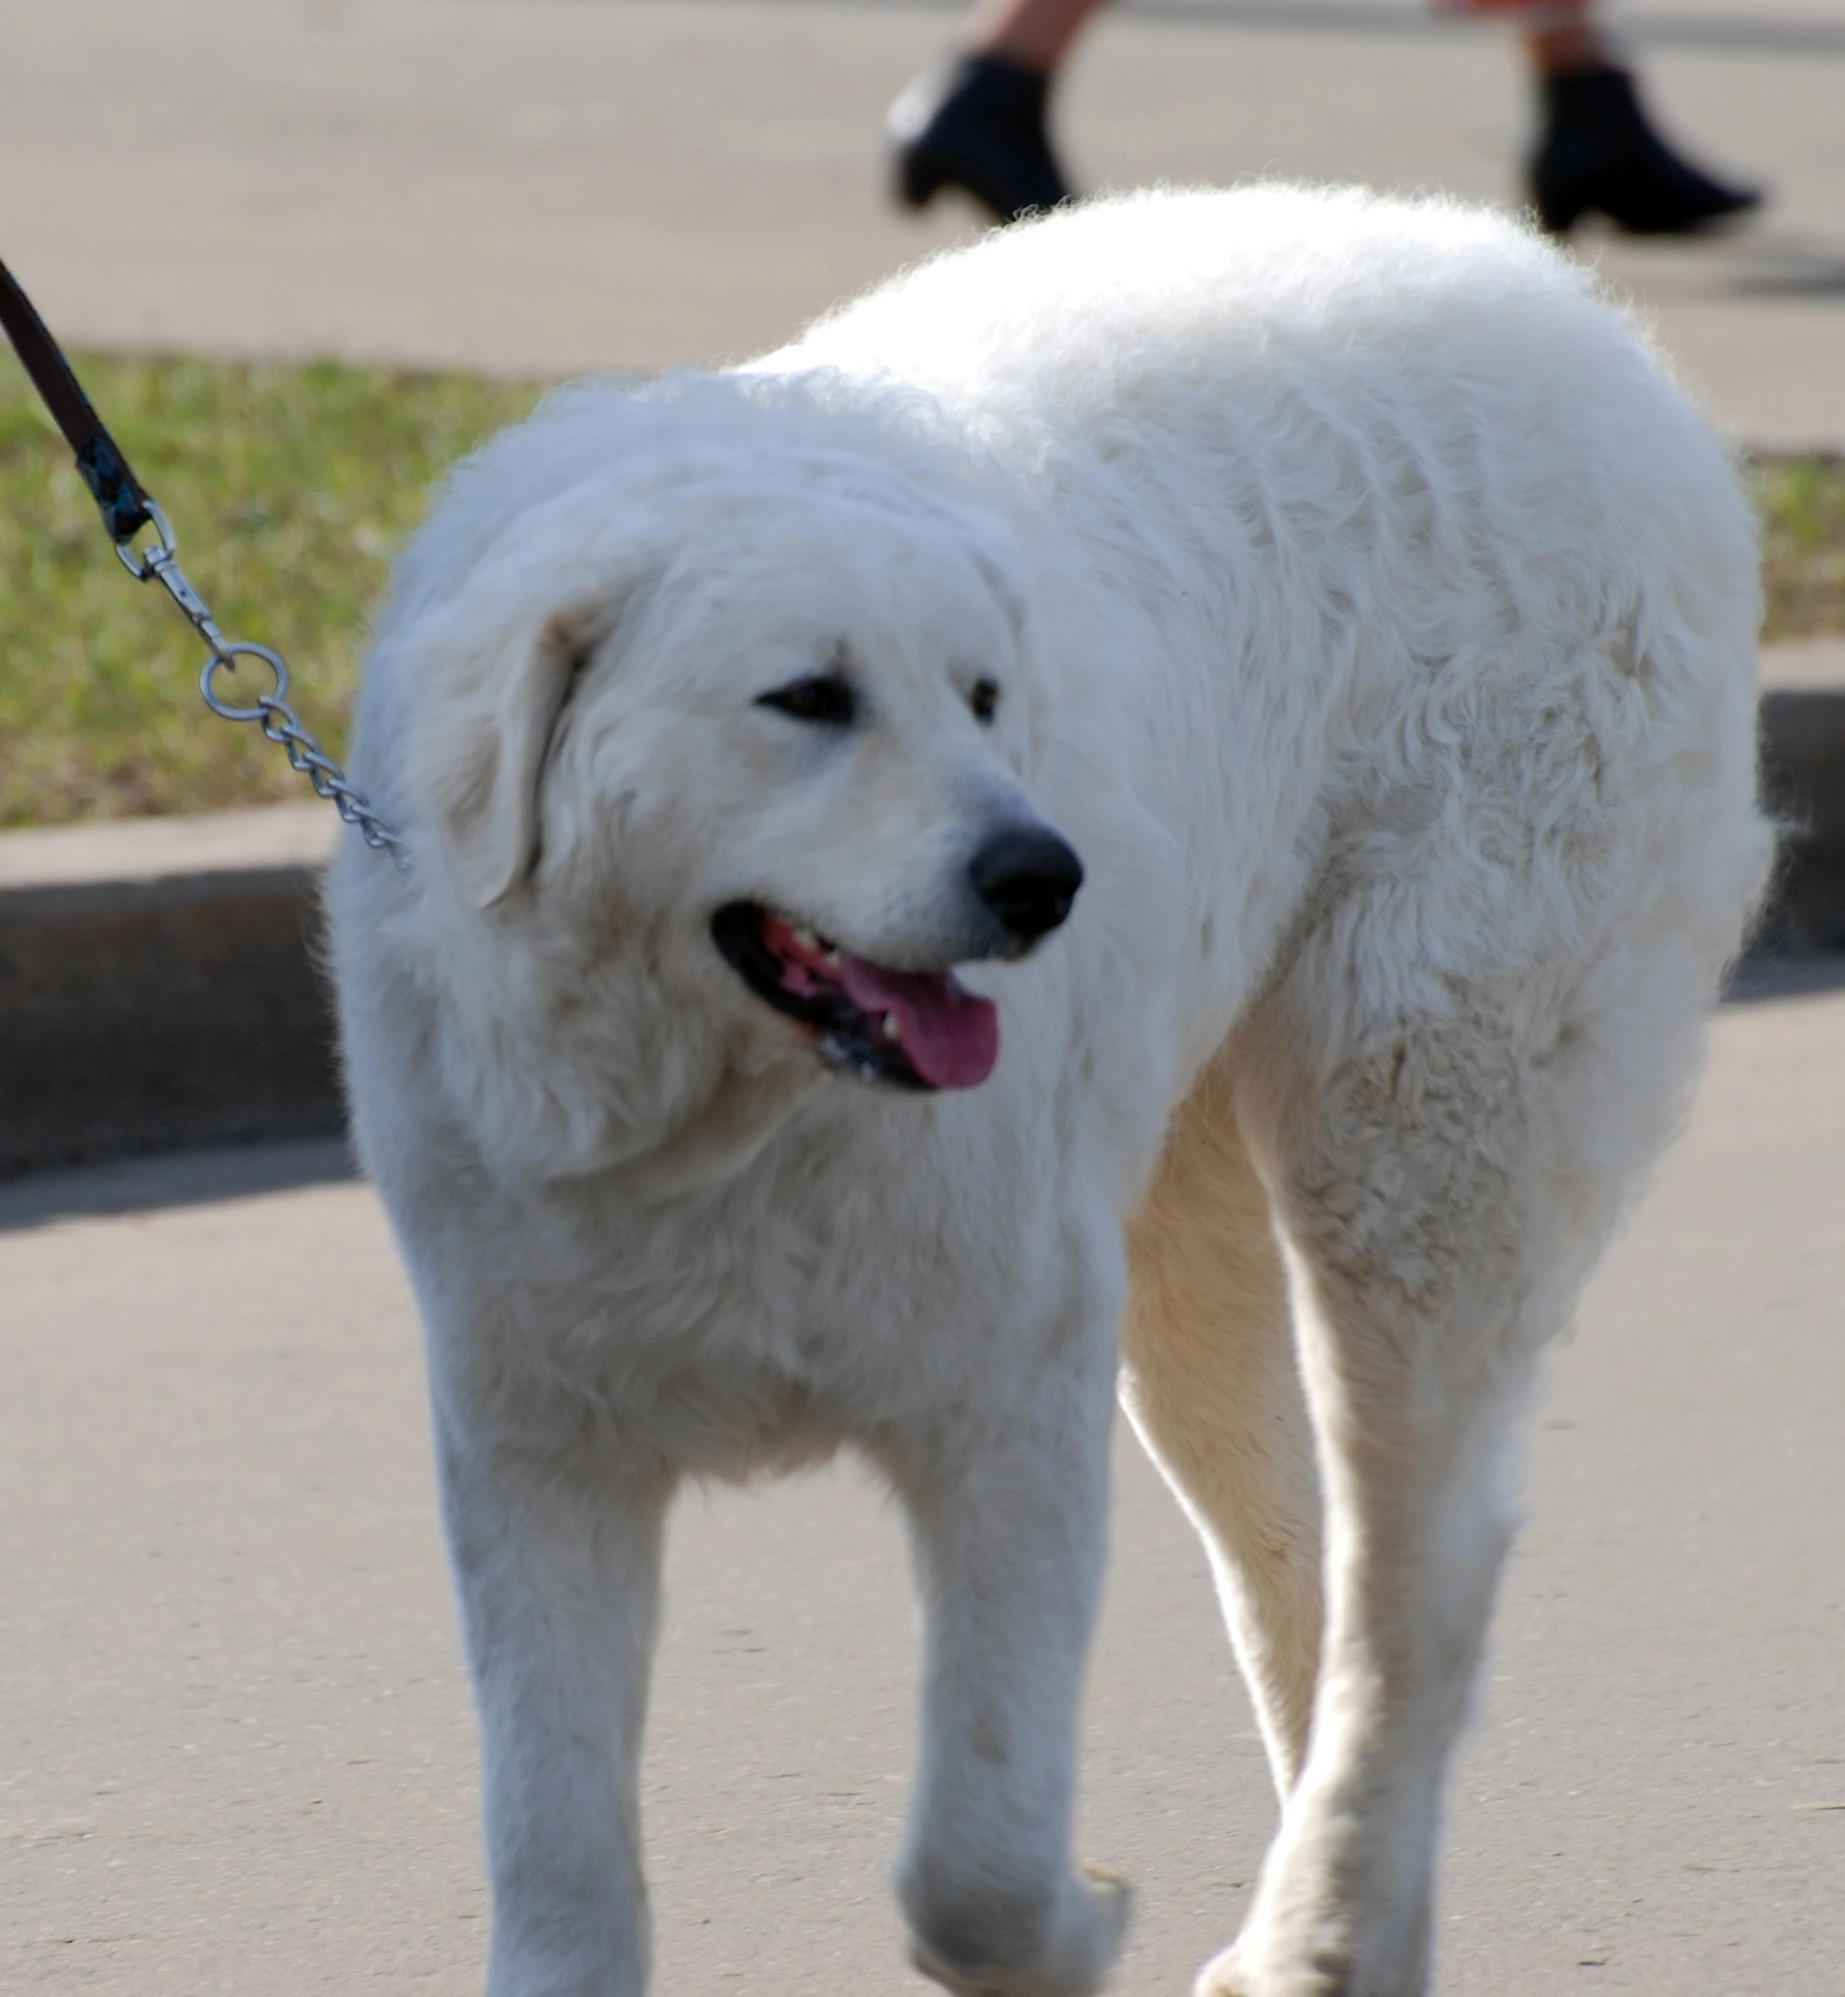 a large white dog walks down the street